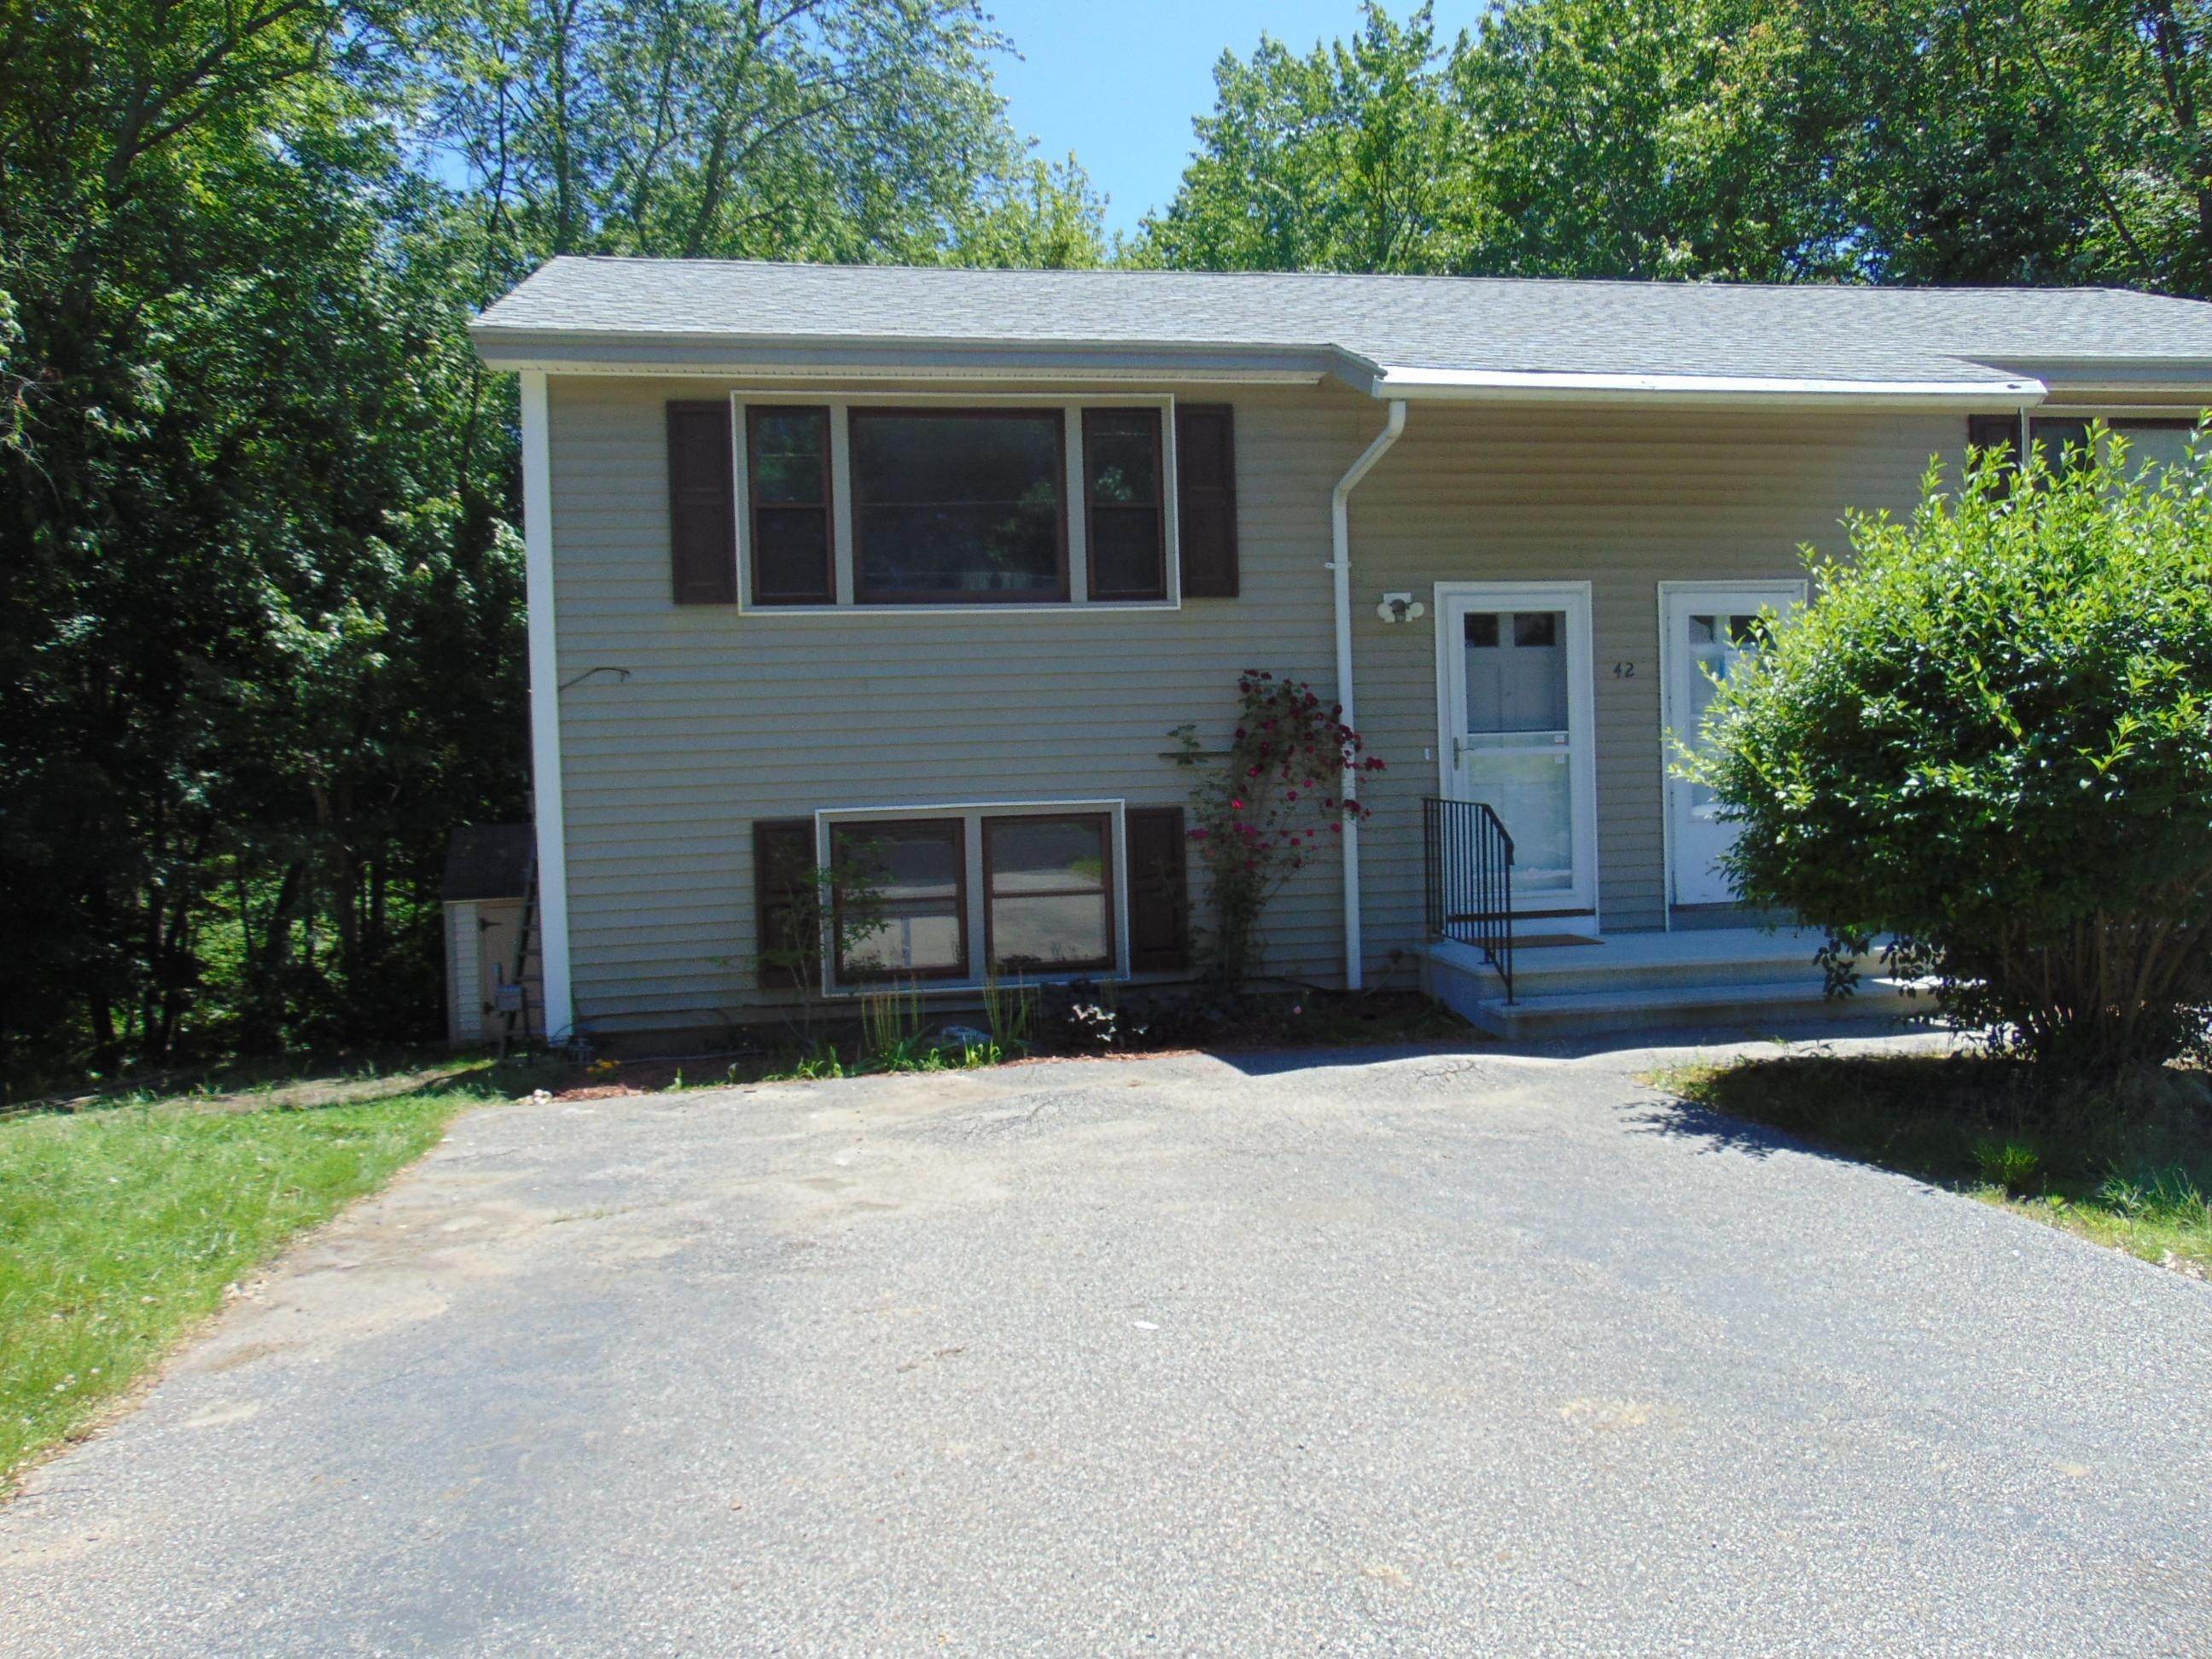 16. Condominiums for Sale at Derry, NH 03038